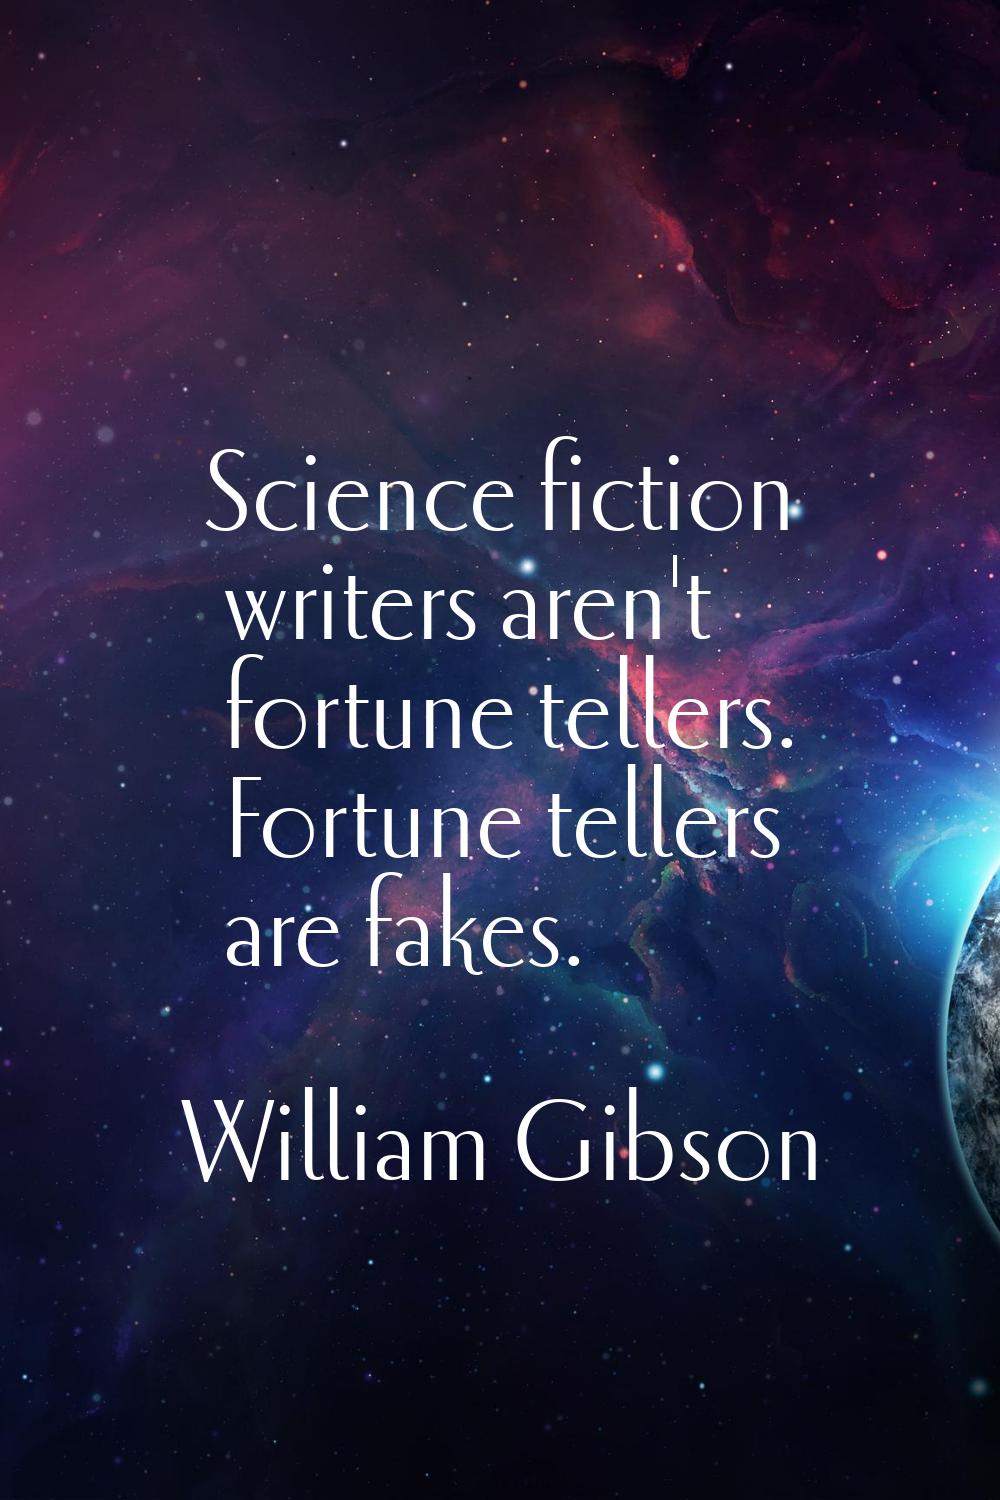 Science fiction writers aren't fortune tellers. Fortune tellers are fakes.